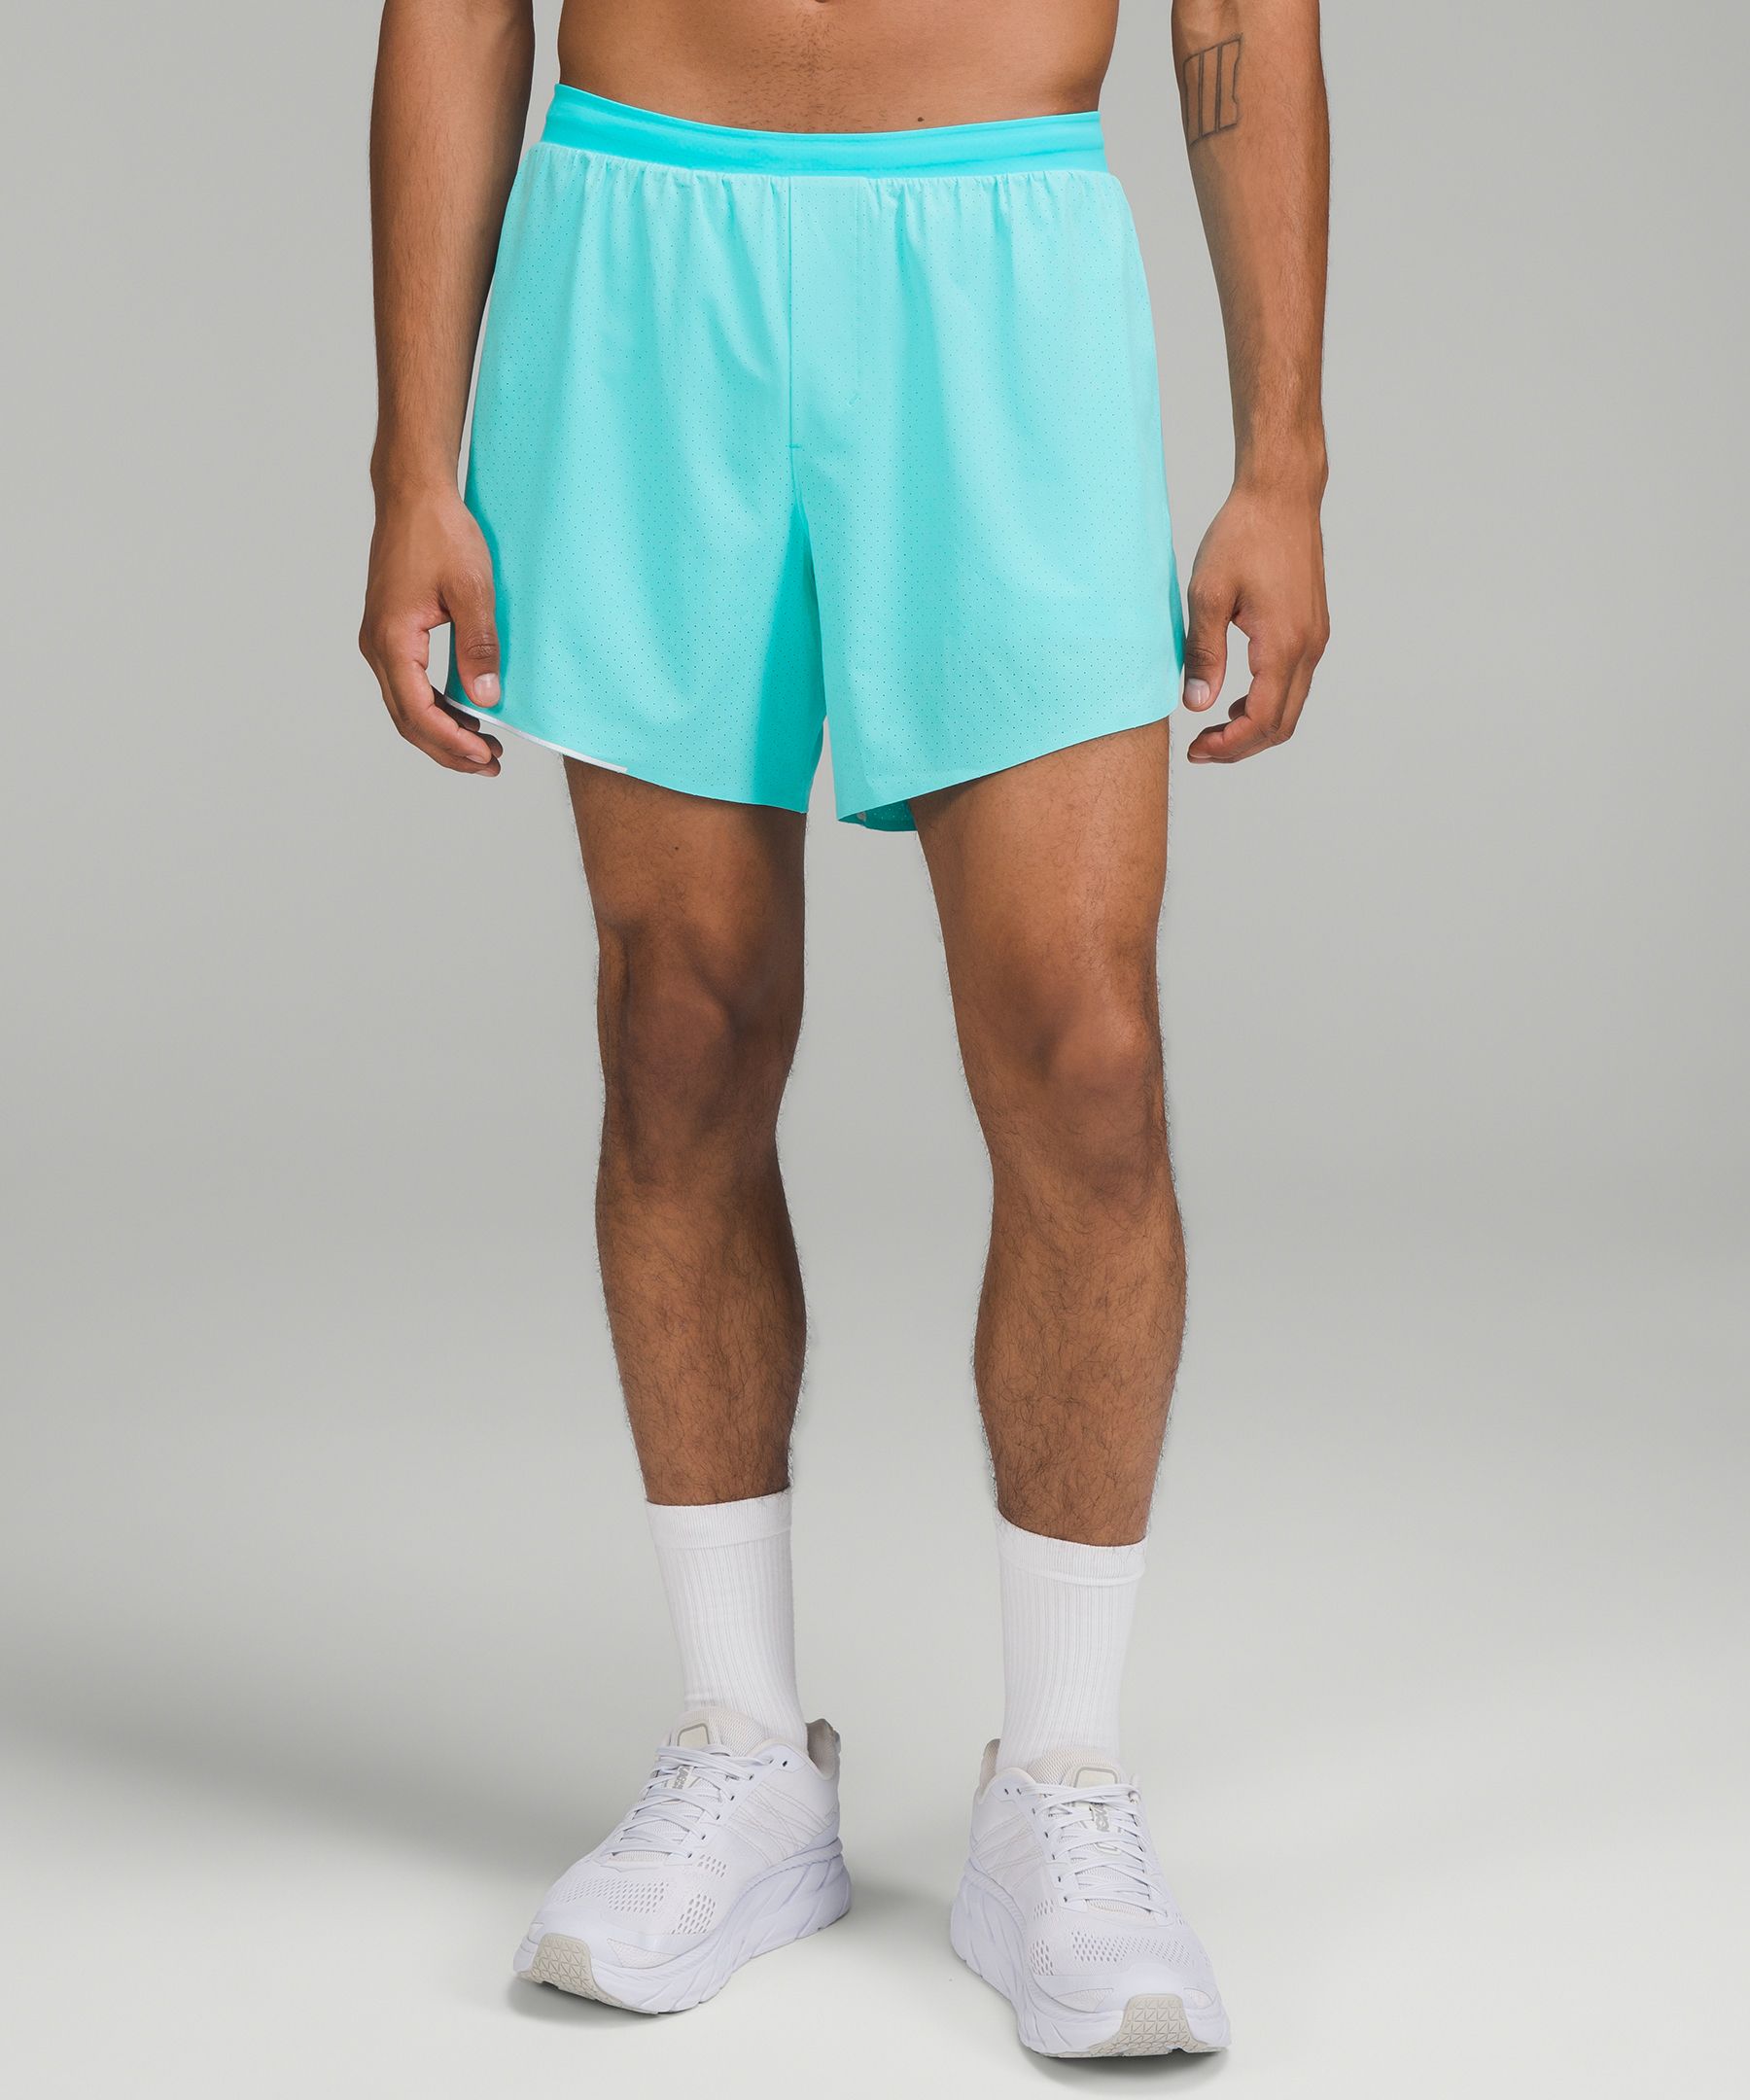 Fast and Free Lined Short 6, Men's Shorts